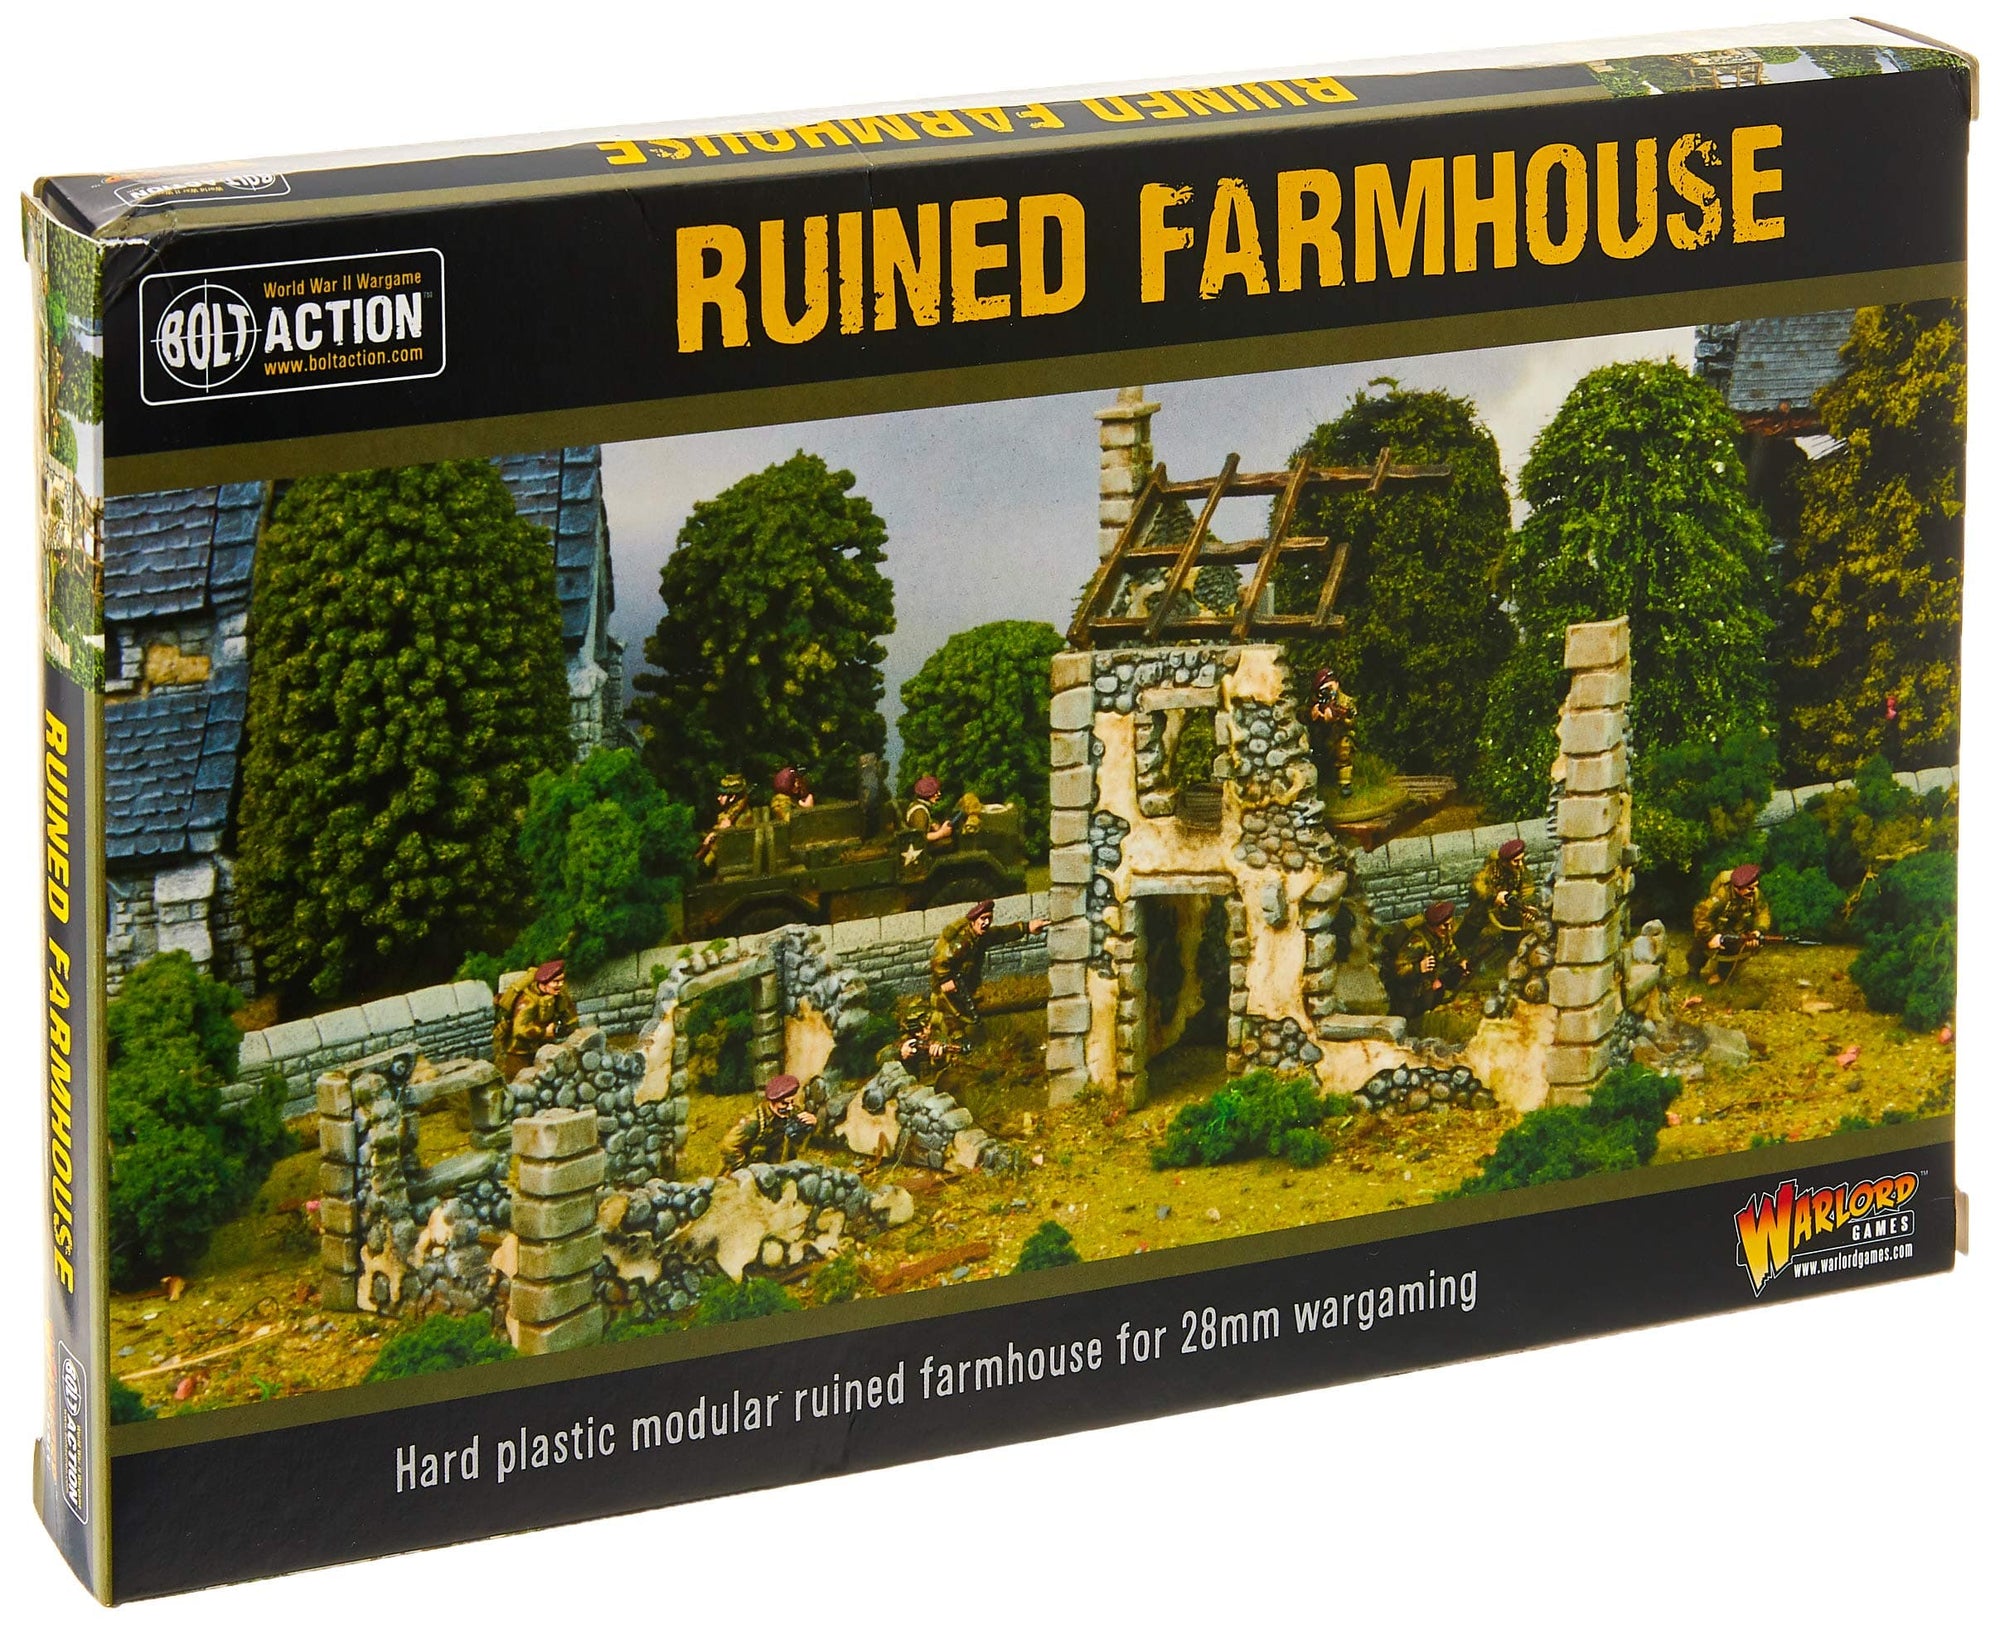 Warlord Games Miniatures Games Warlord Games Bolt Action: Ruined Farmhouse